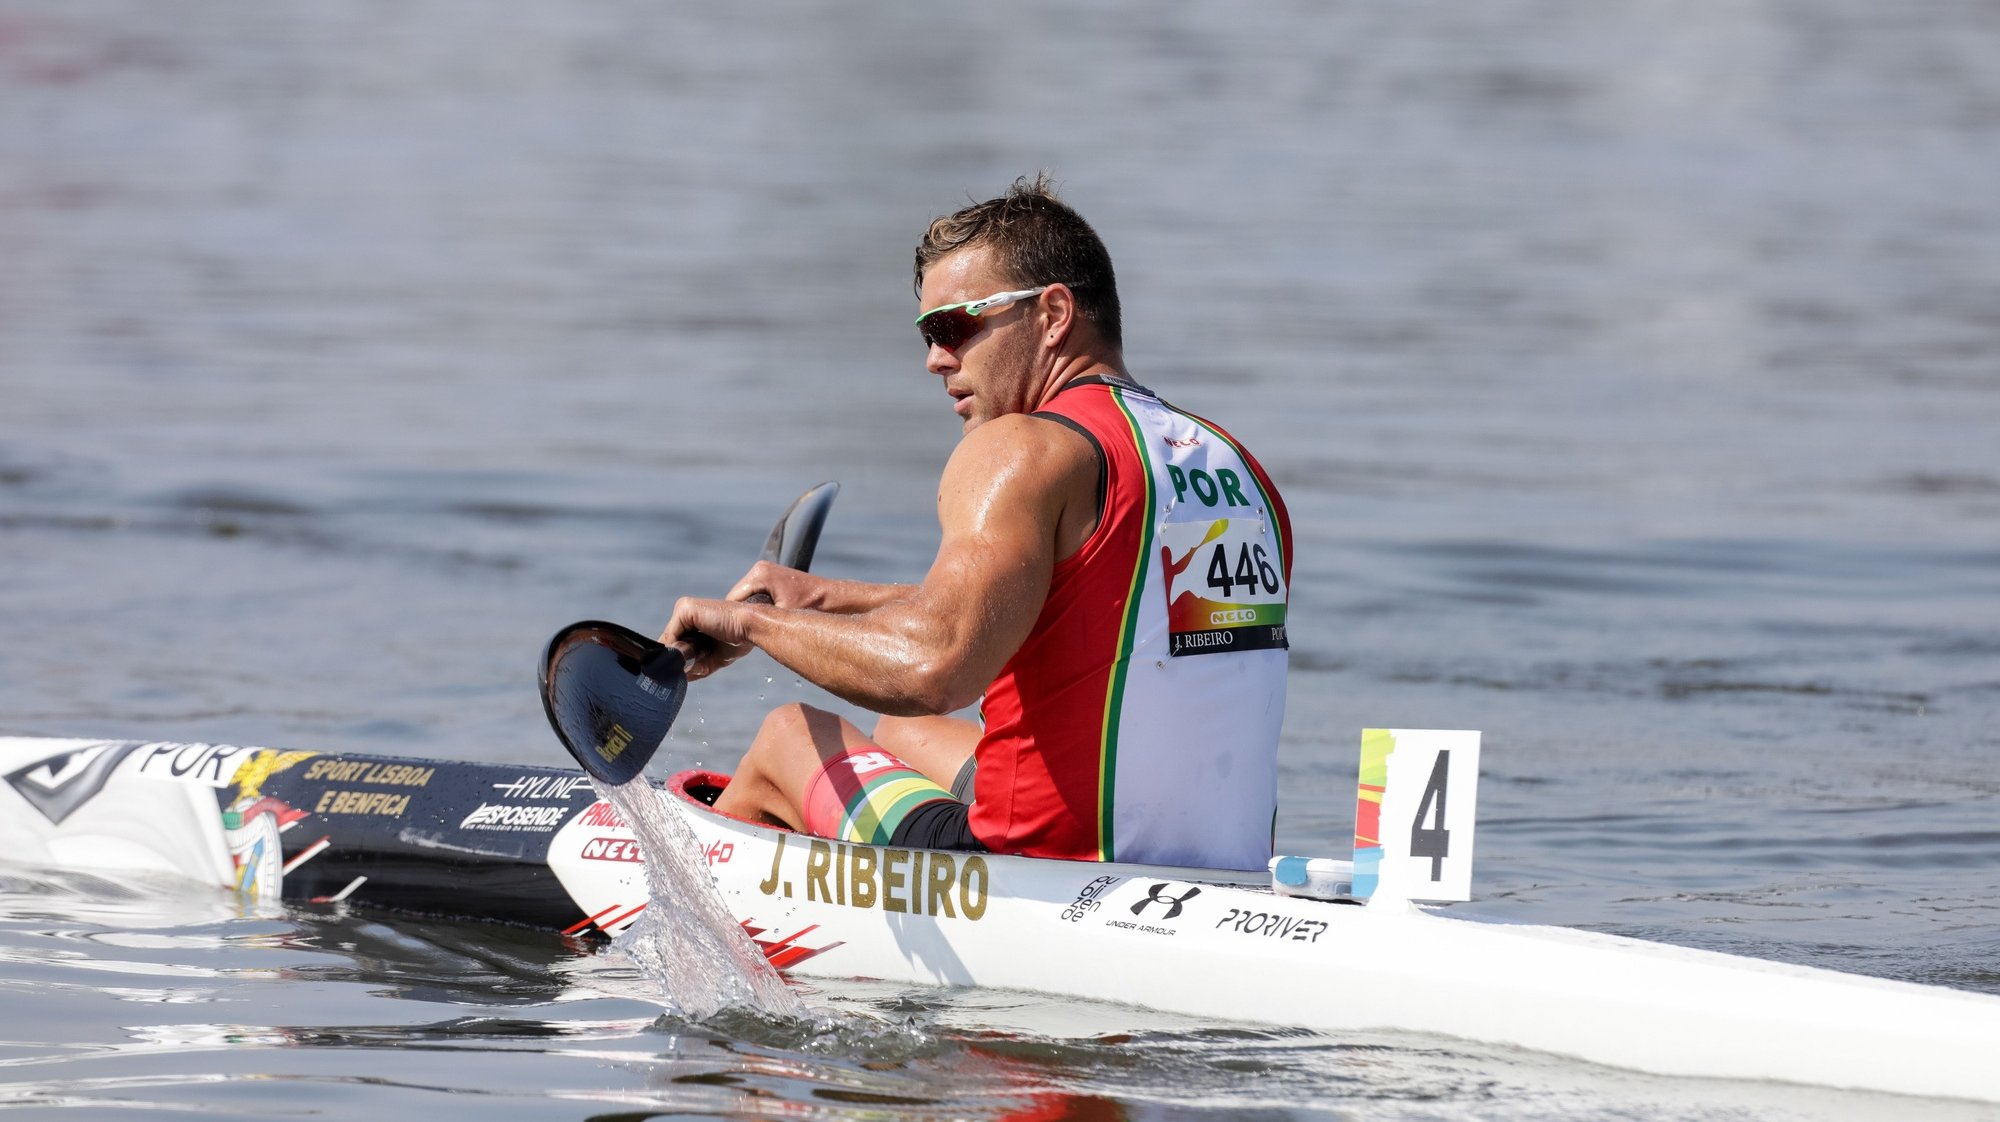 Portugal´s Joao Ribeiro during the K1 men 500m semifinal 3 at 2018 ICF Canoe Sprint World Championships in Montemor-o-Velho, center of Portugal, 24 August 2018. The event runs from 23 until 26 August. PAULO NOVAIS/LUSA